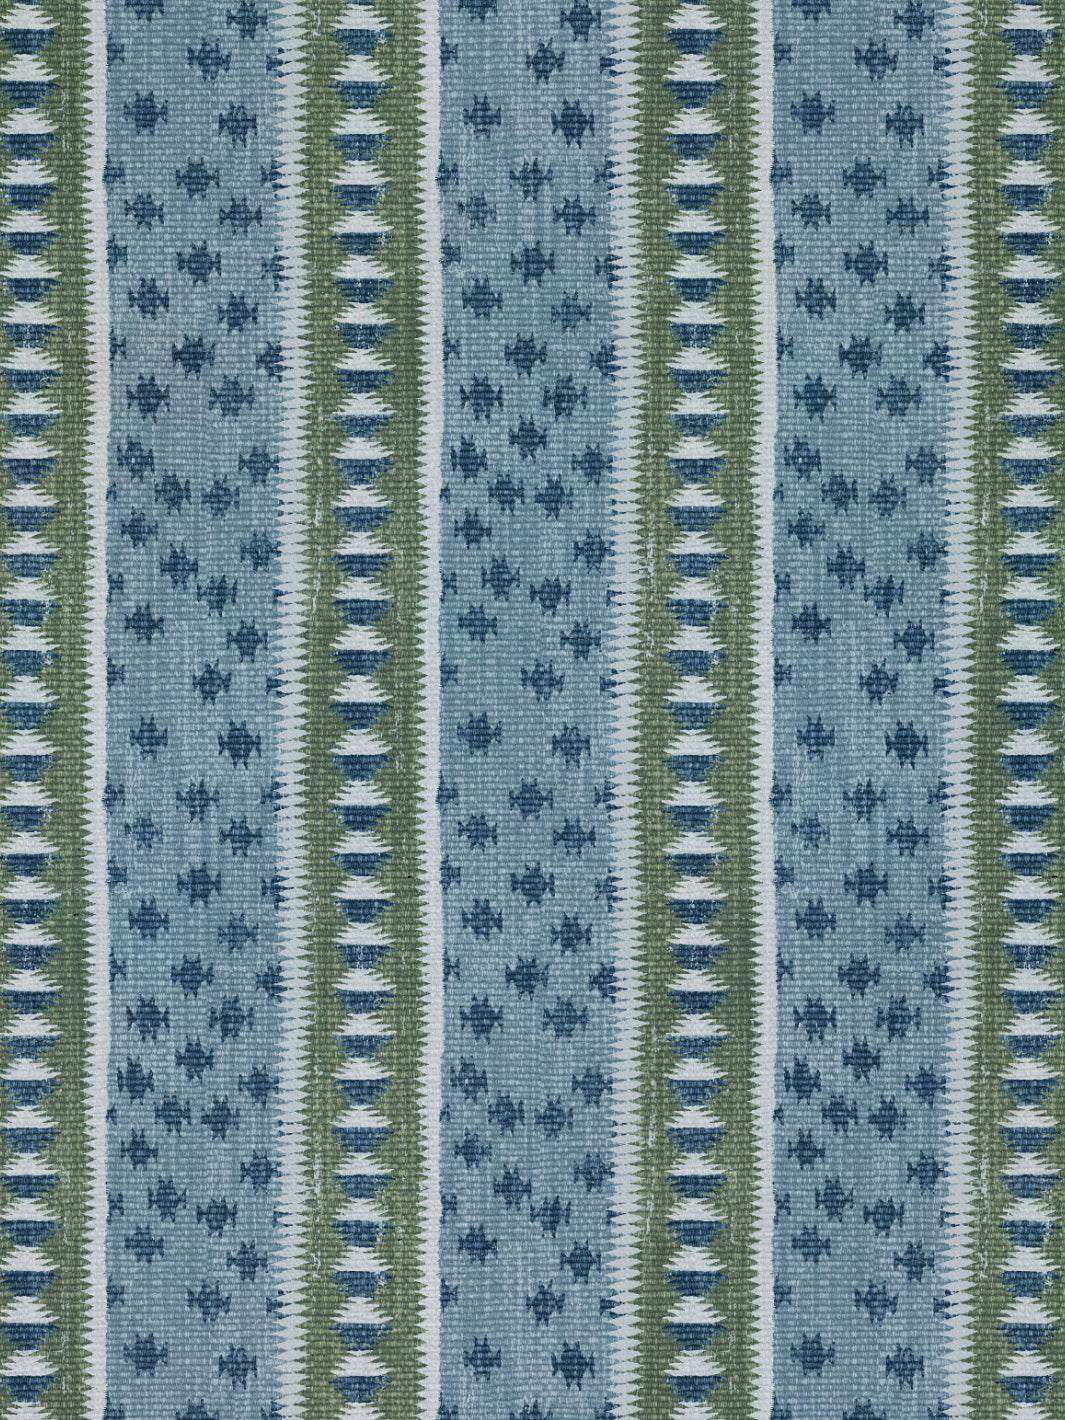 'Northstar Stripe' Linen Fabric by Nathan Turner - Green Blue